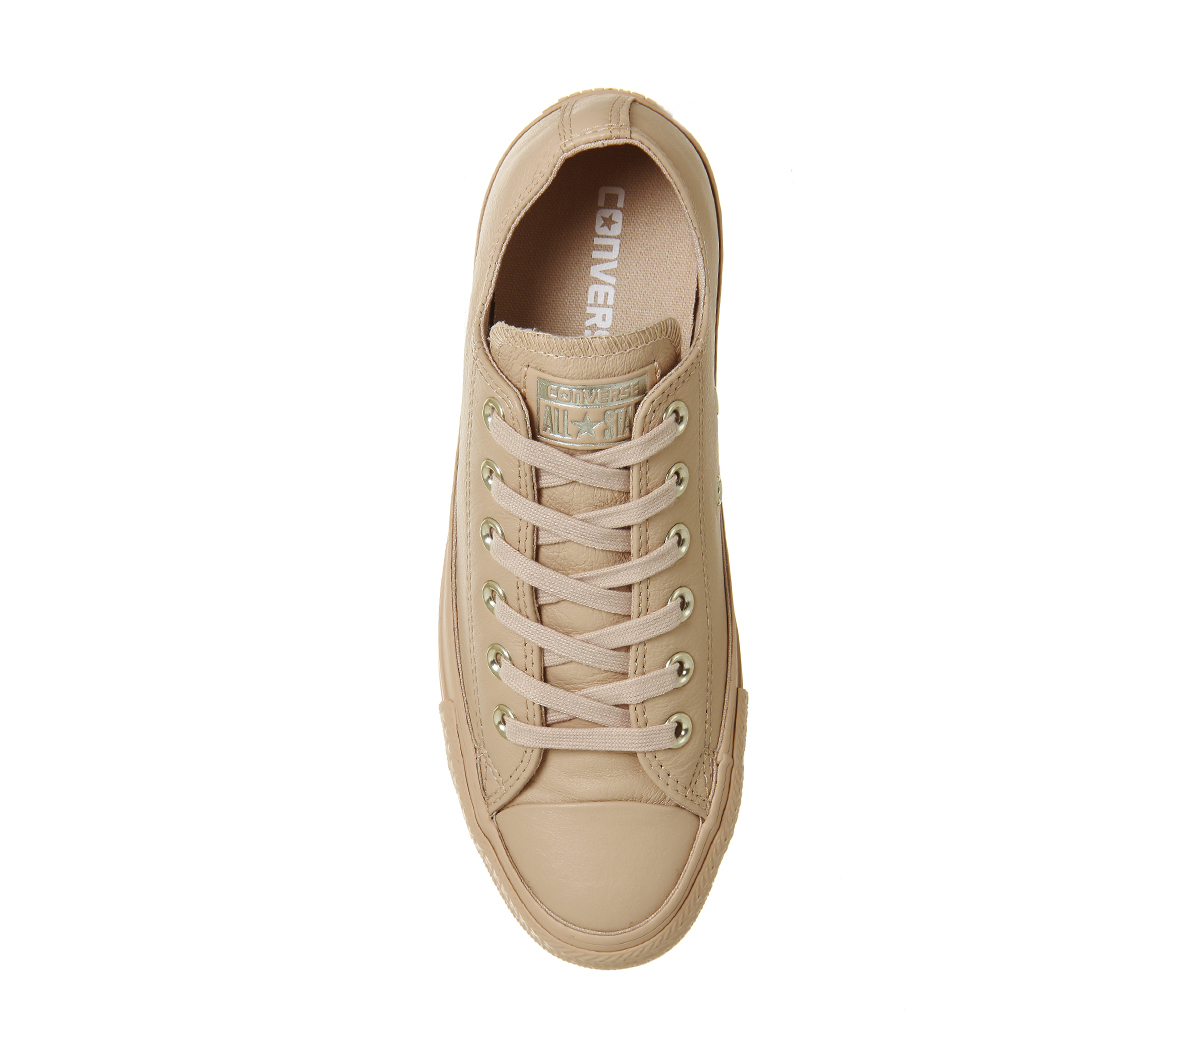 converse allstar low leather amberlight light gold exclusive